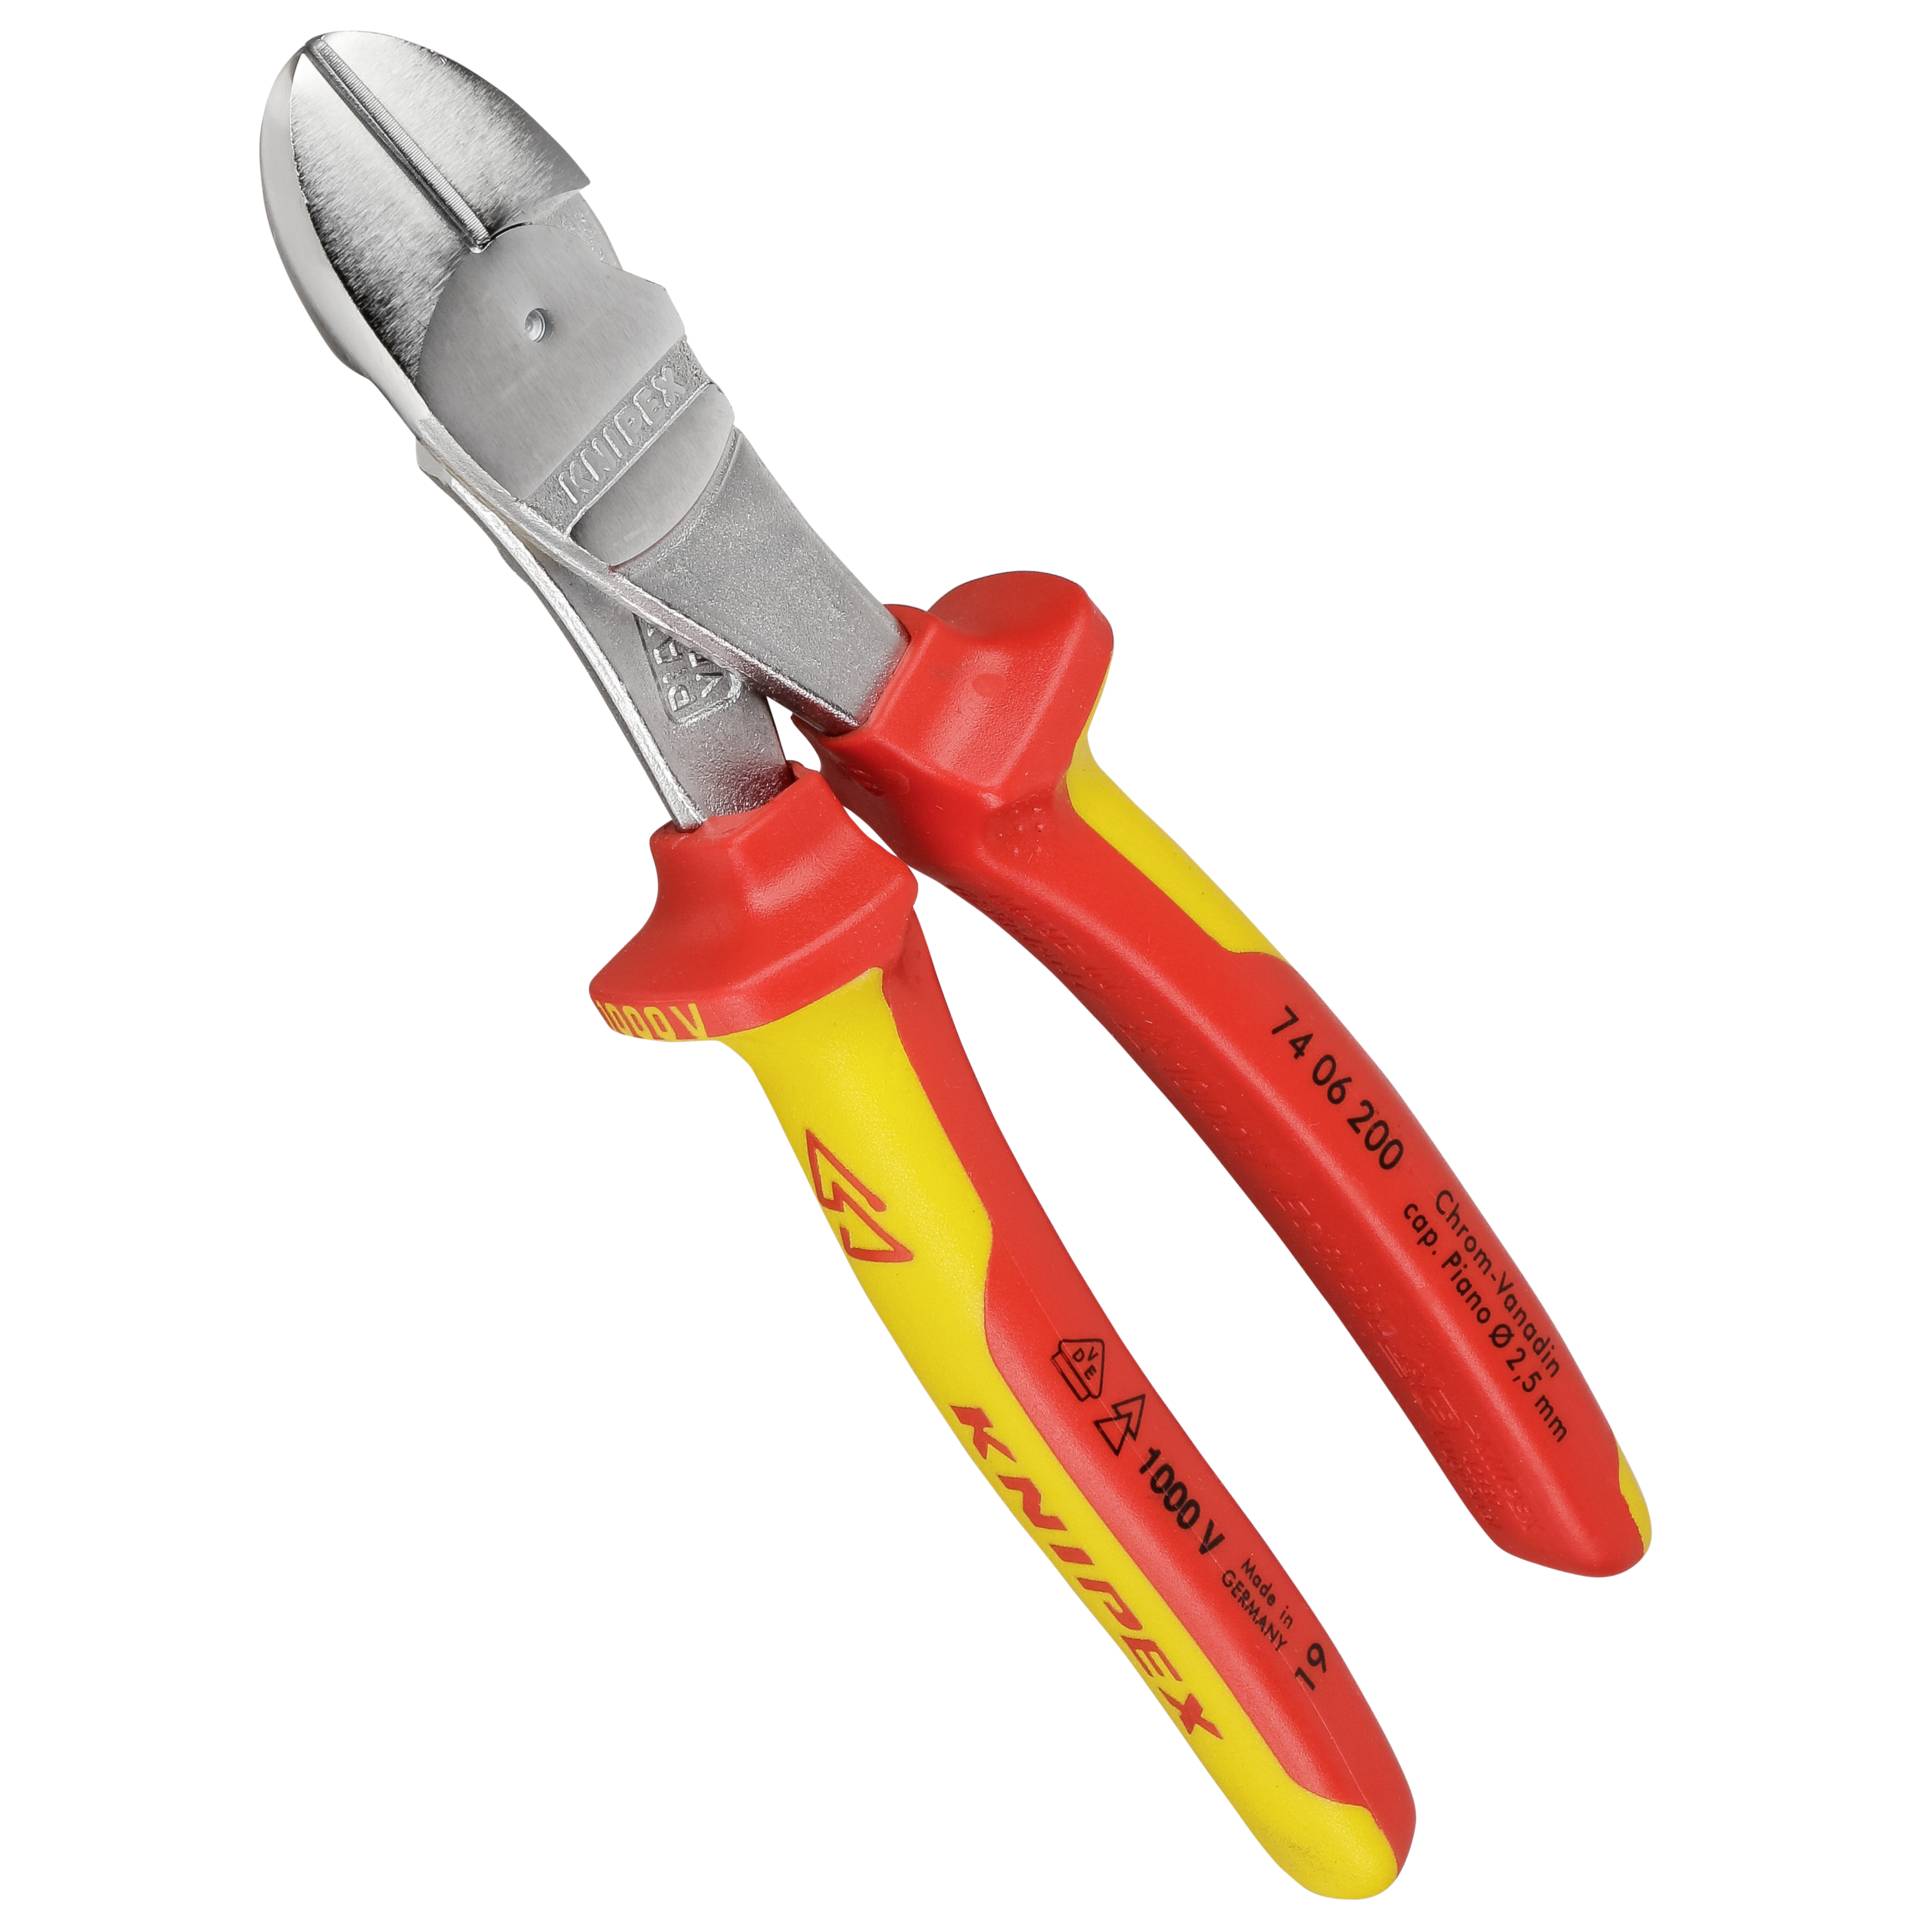 KNIPEX tronchese laterale per meccanica isol. 200 mm